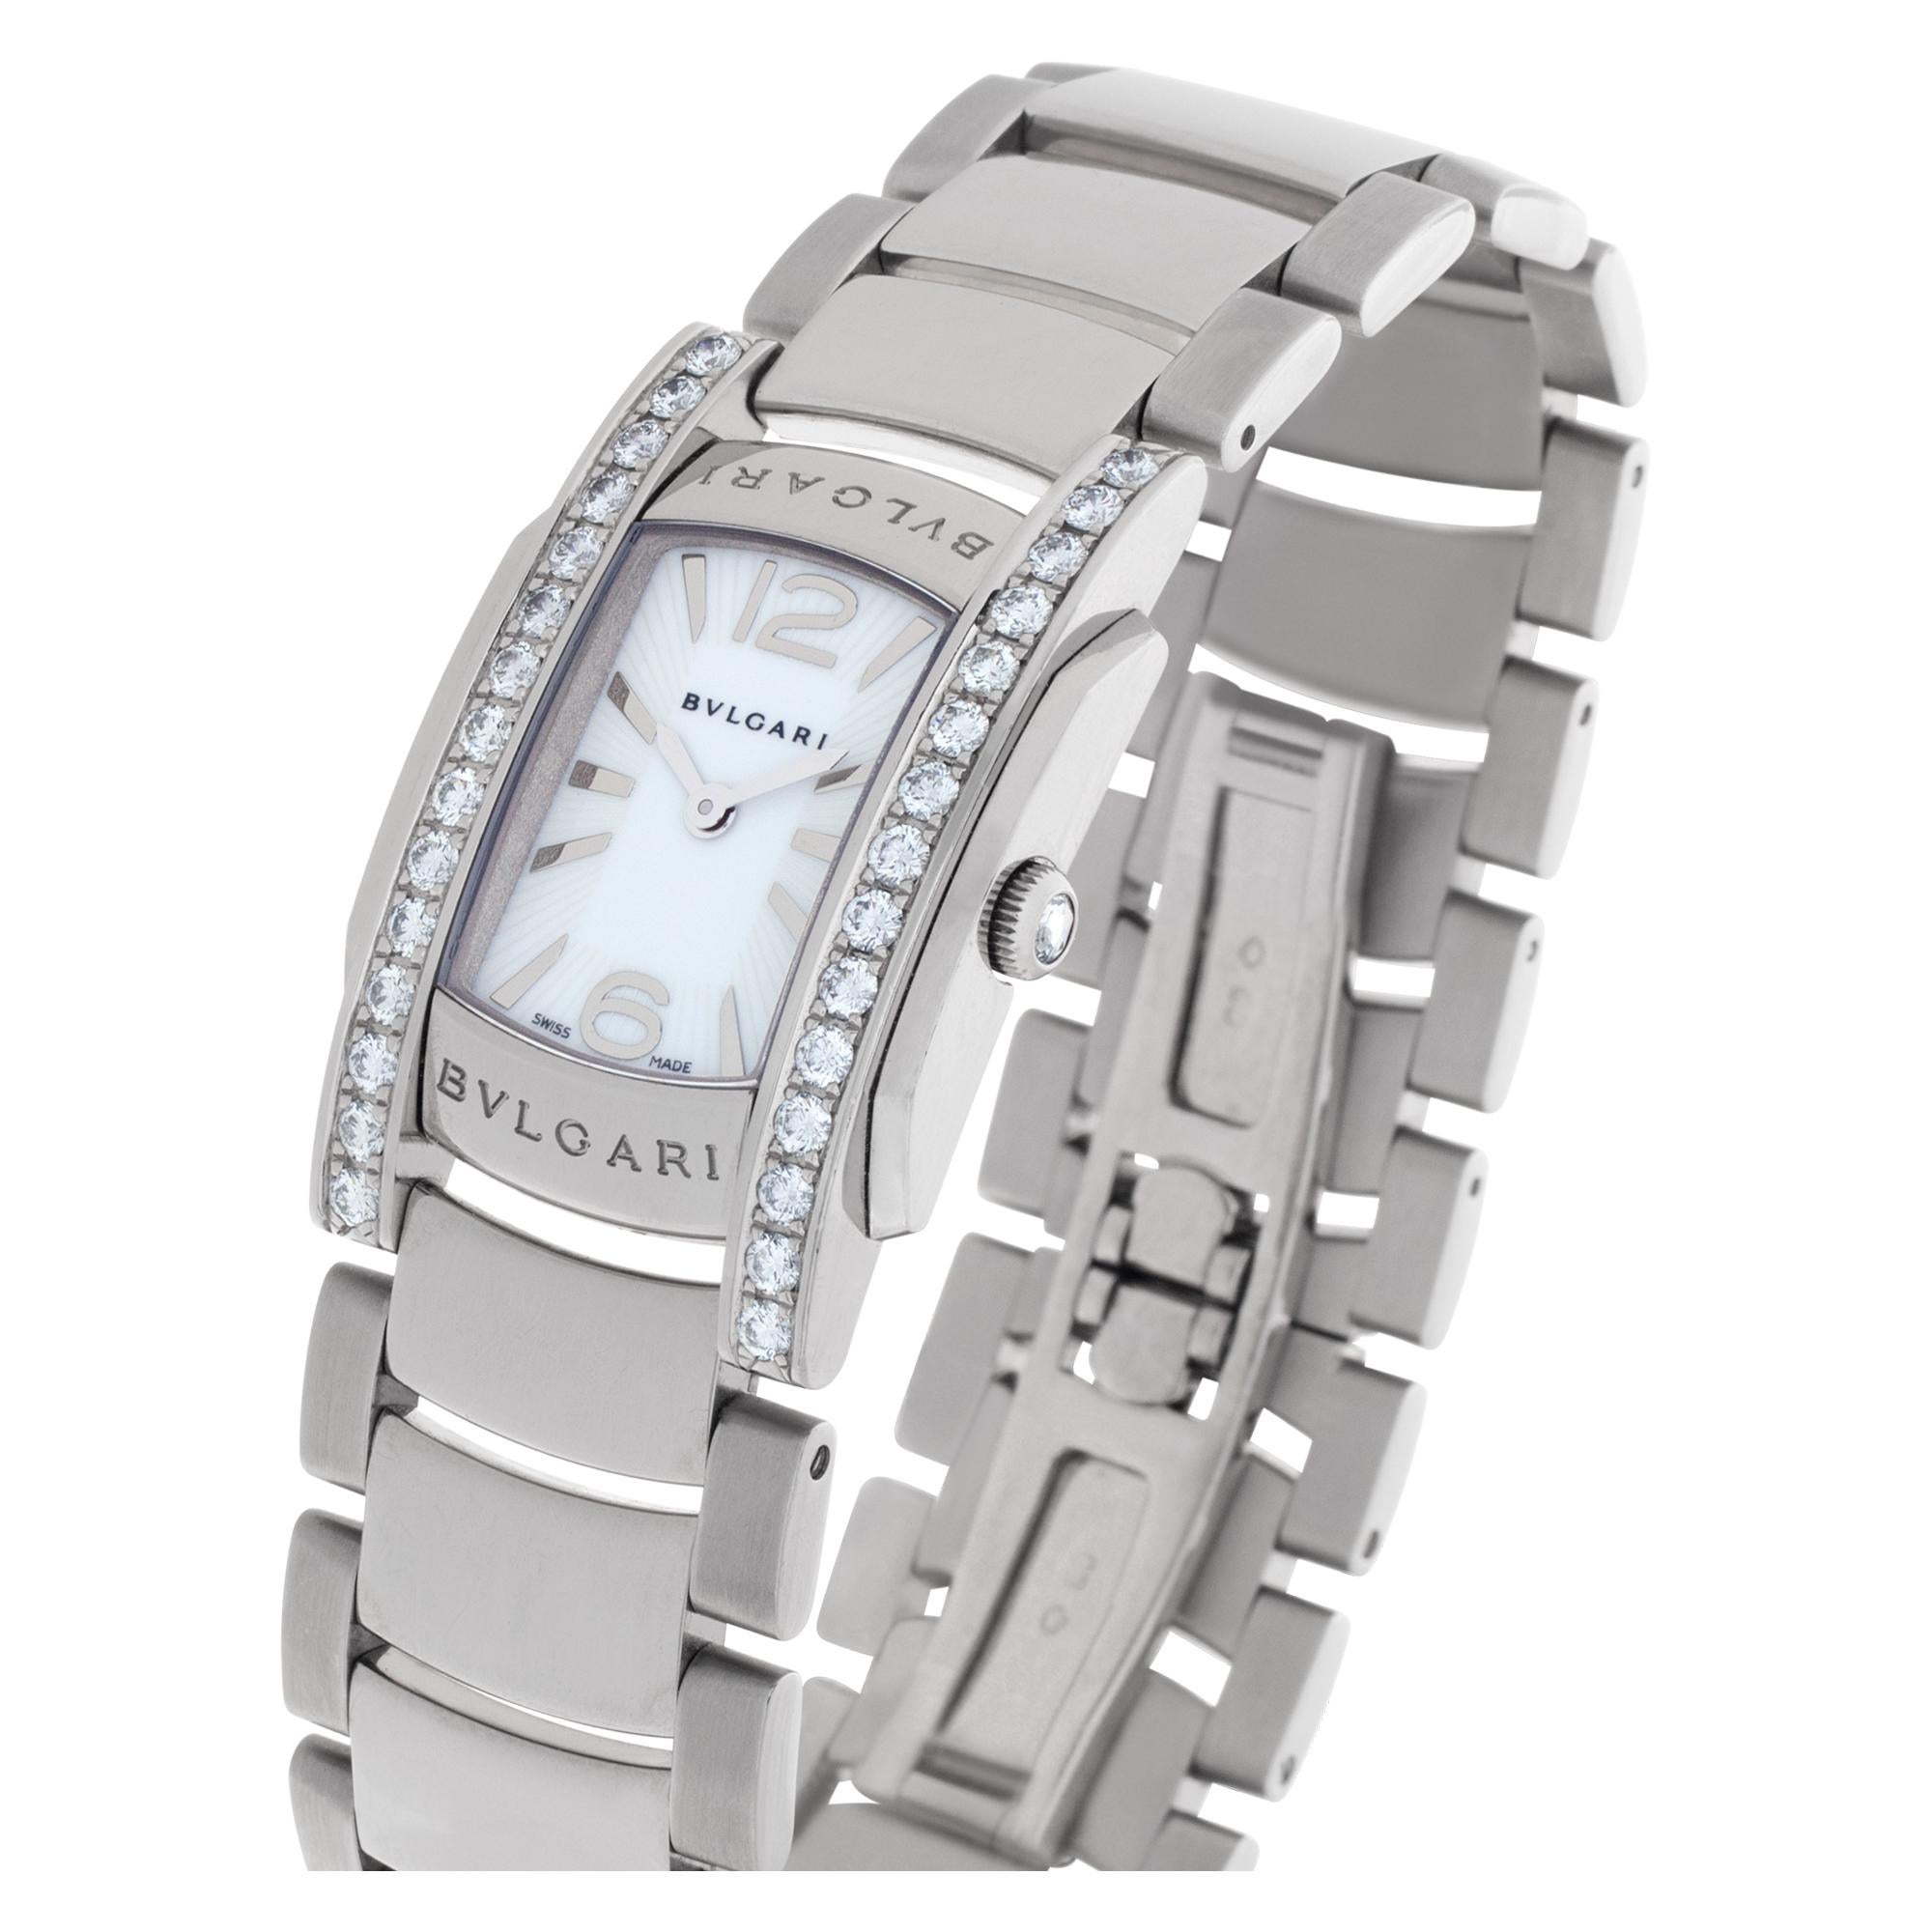 Bvlgari Assioma with diamond case in 18k white gold with diamond crown. Quartz. Ref AAW31WGD1G. Circa 2000s. Fine Pre-owned Bvlgari / Bulgari Watch.

Certified preowned Dress Bvlgari Assioma AAW31WGD1G watch is made out of white gold on a 18k White